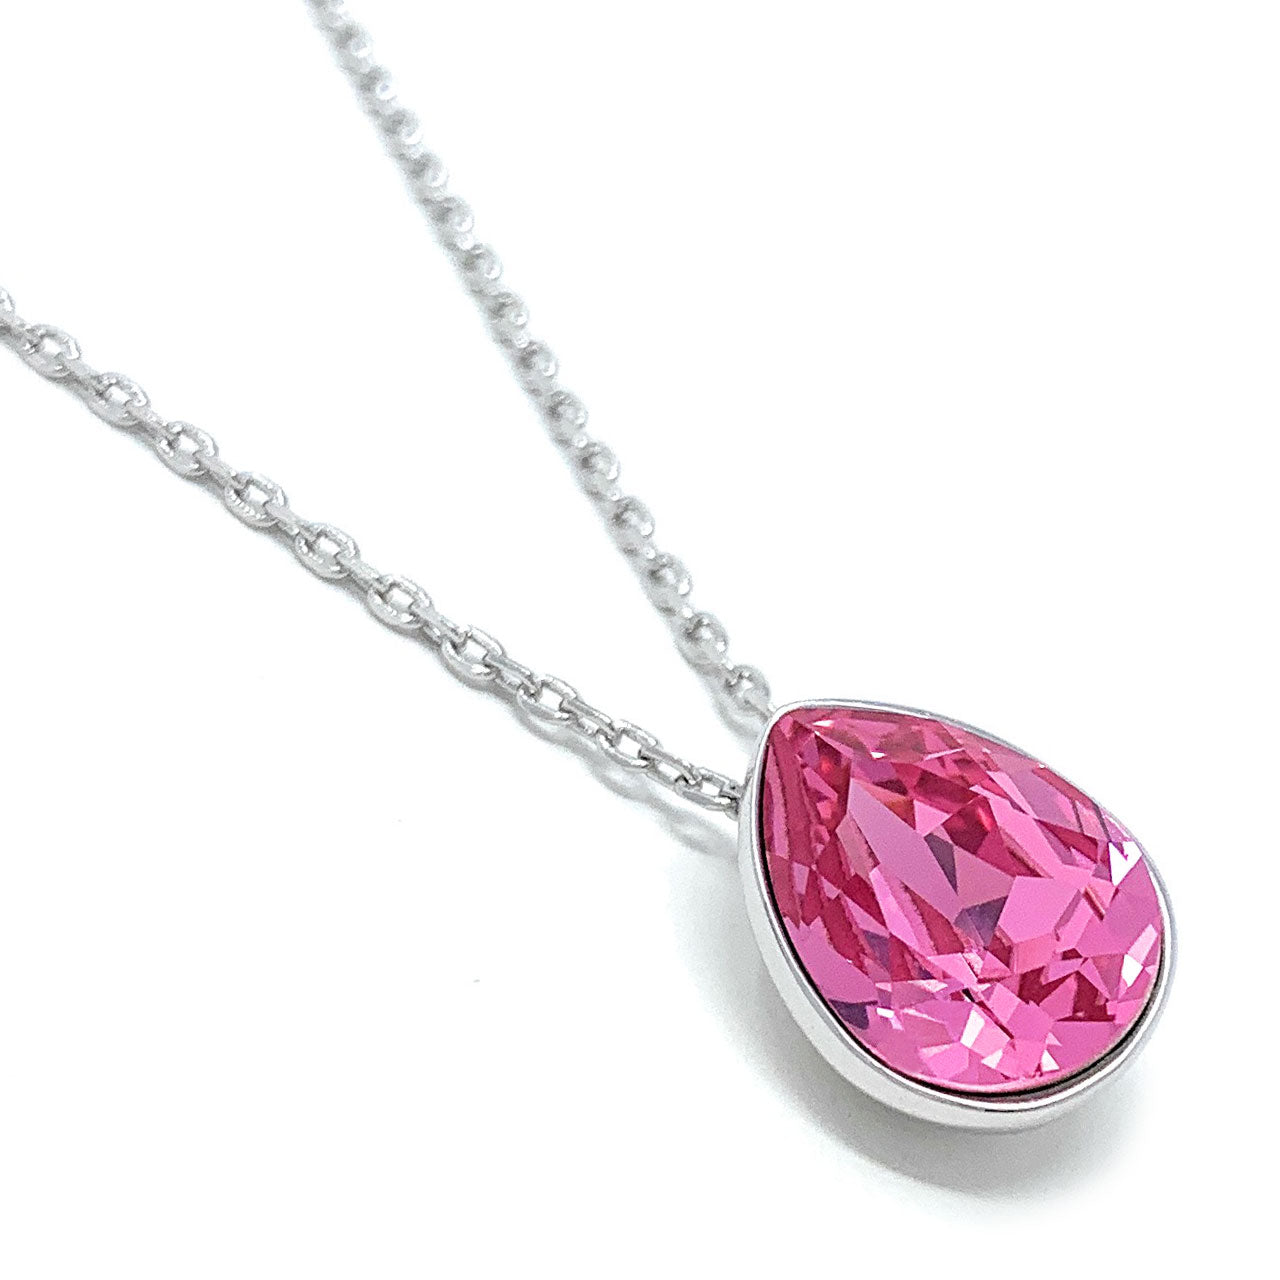 Mary Pendant Necklace with Pink Rose Drop Crystals from Swarovski Silver Toned Rhodium Plated - Ed Heart